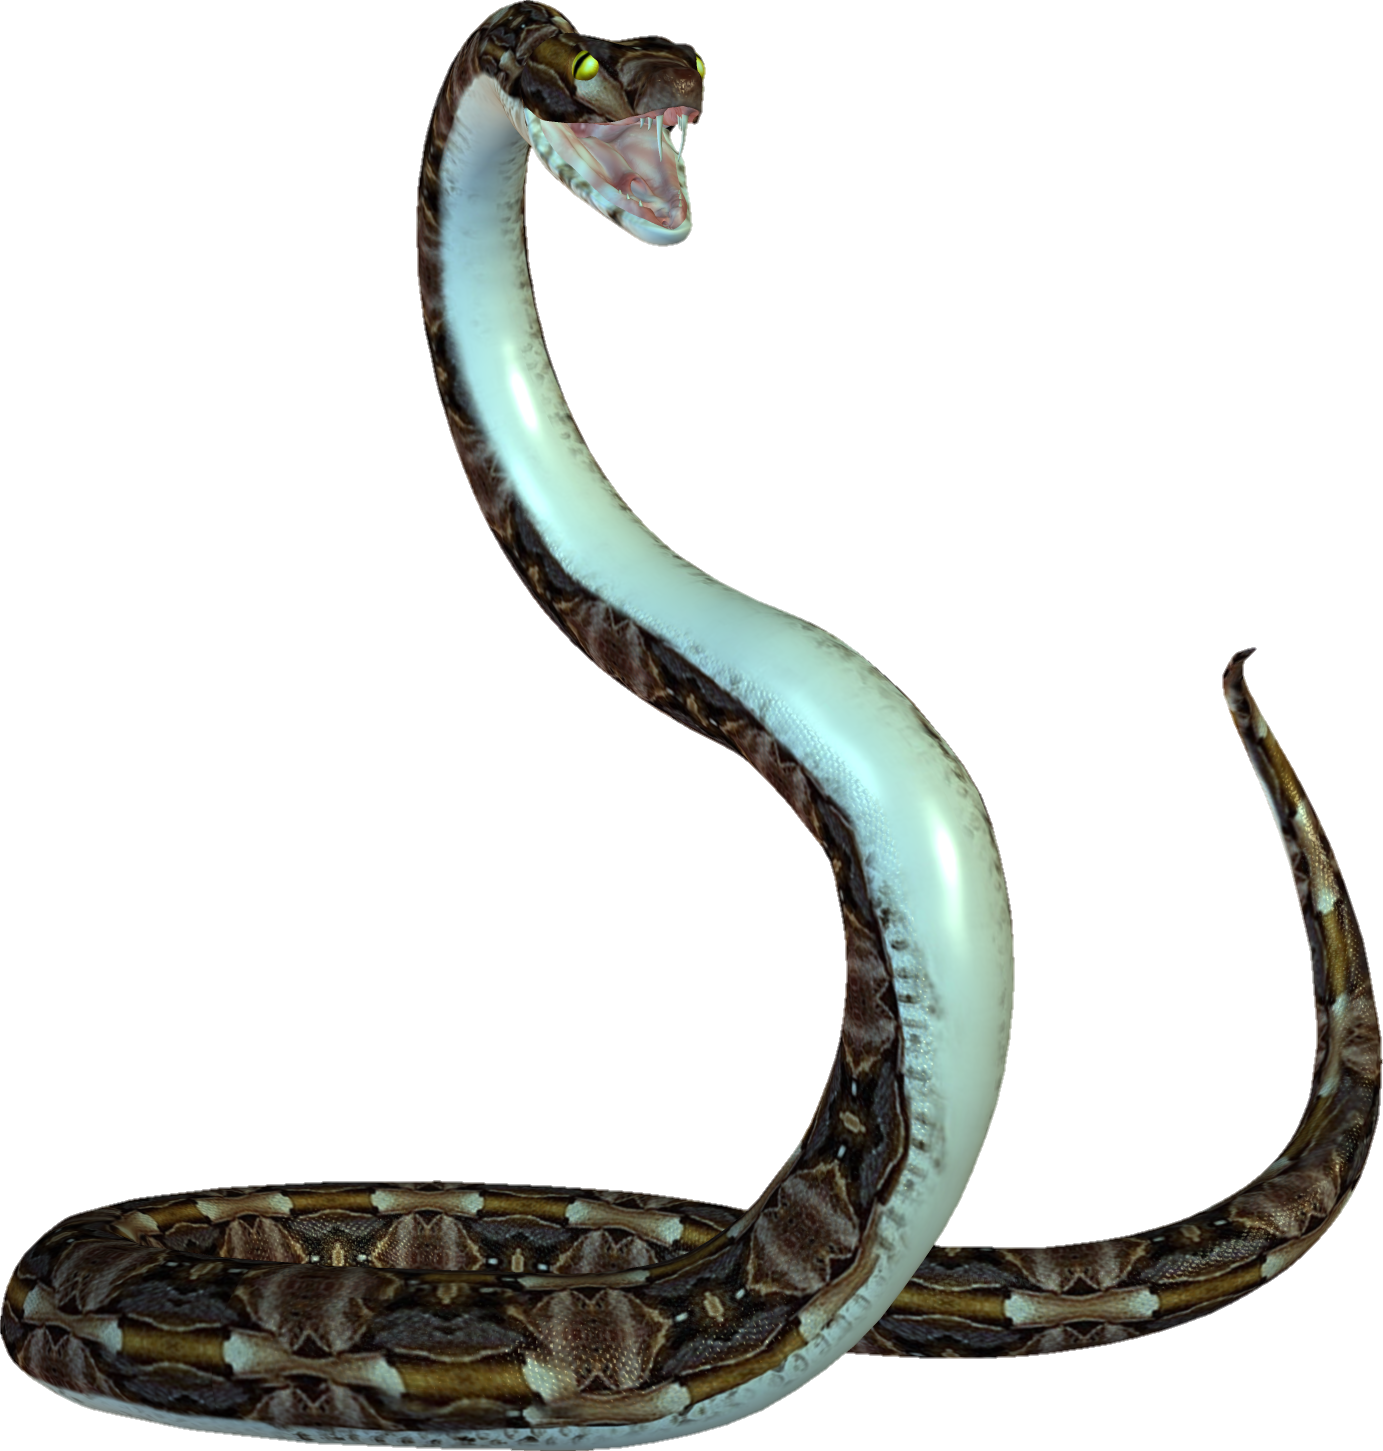 snake-png-image-pngfre-19